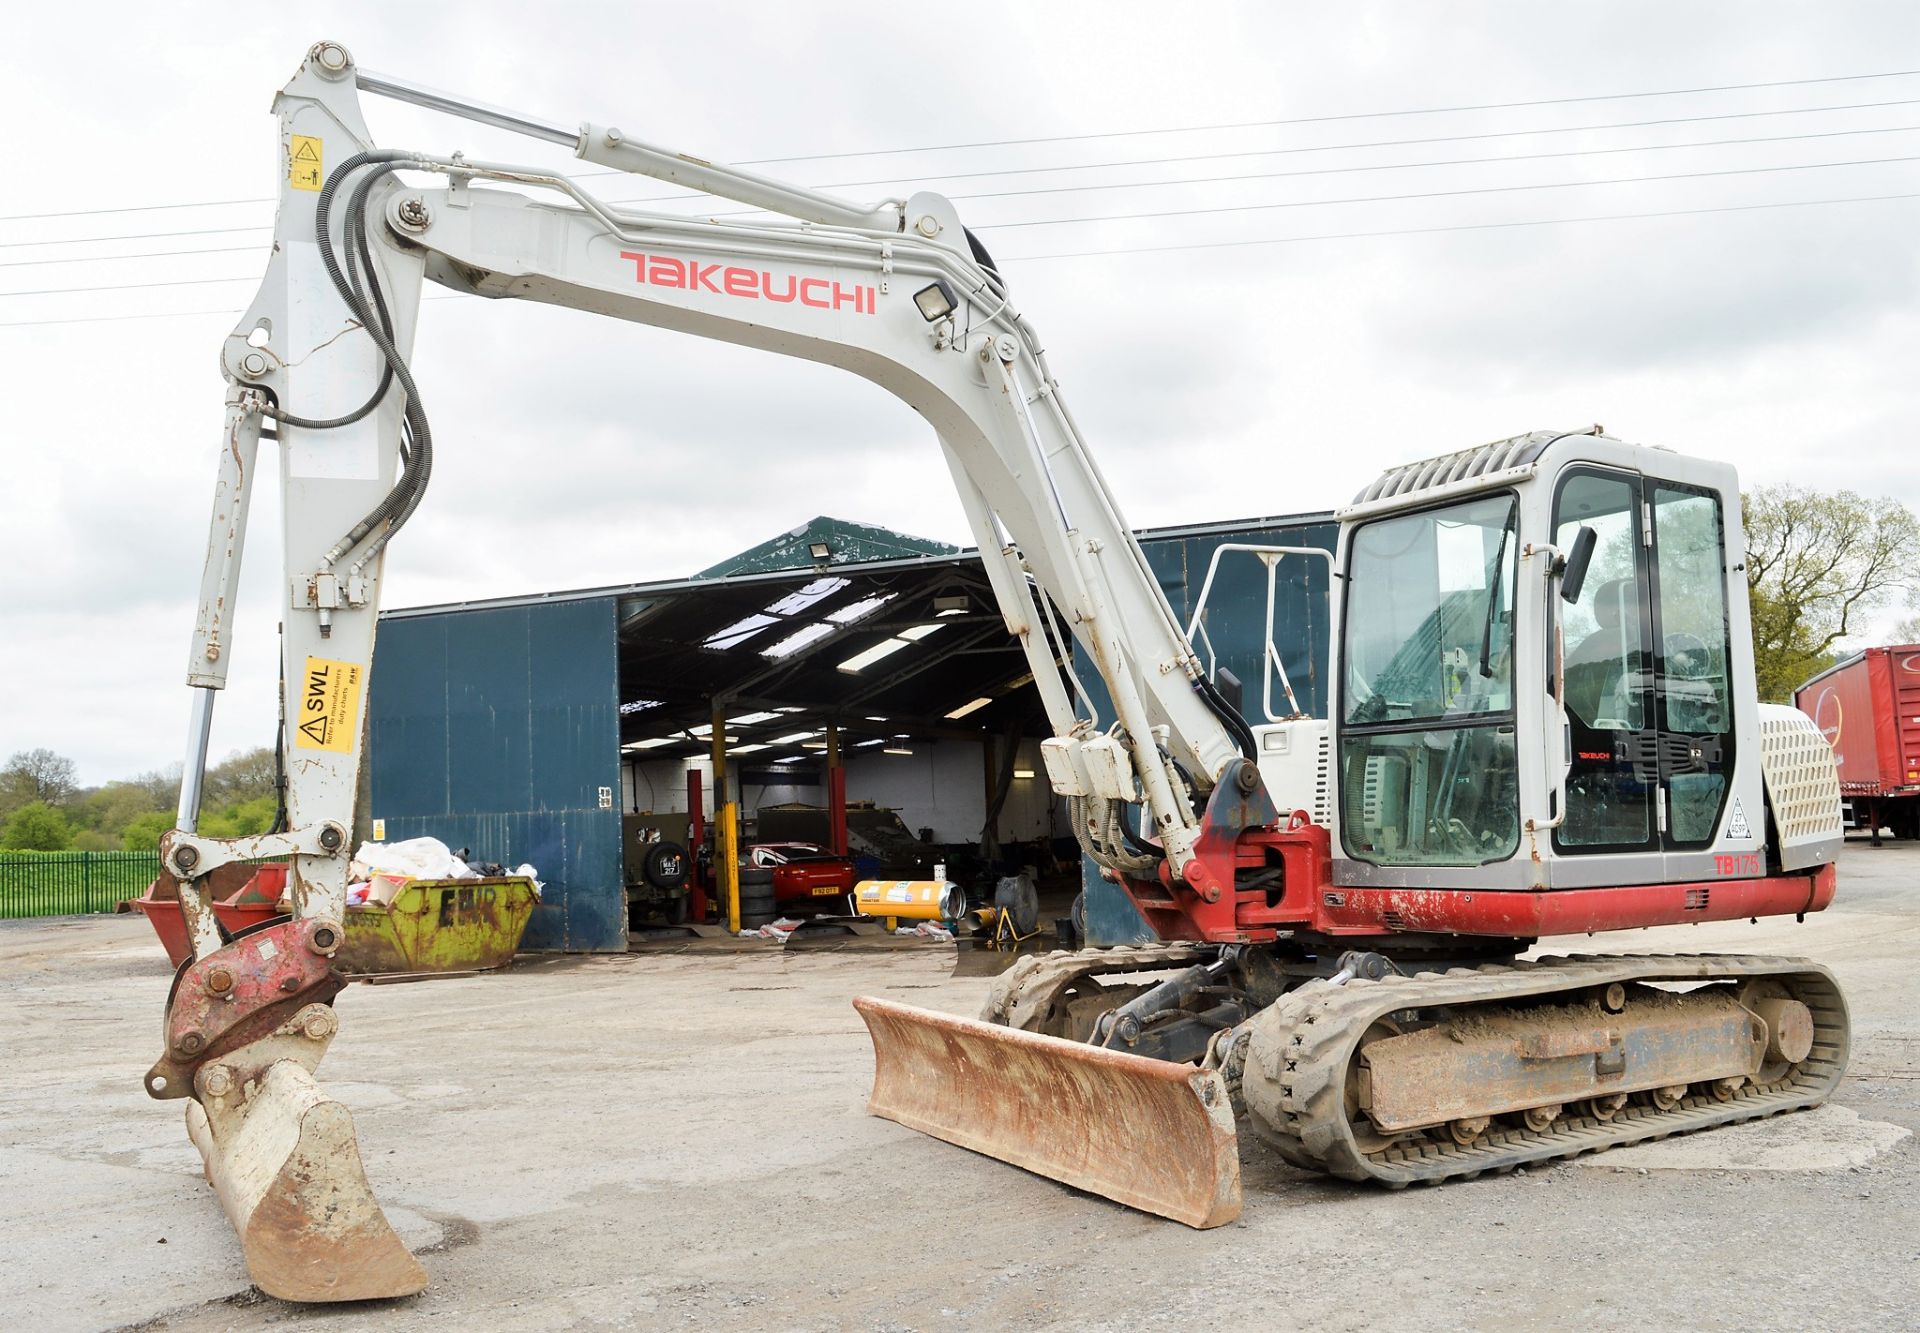 Takeuchi TB175 7.5 tonne rubber tracked excavator Year: 2010 S/N: 301657 Recorded Hours: Not